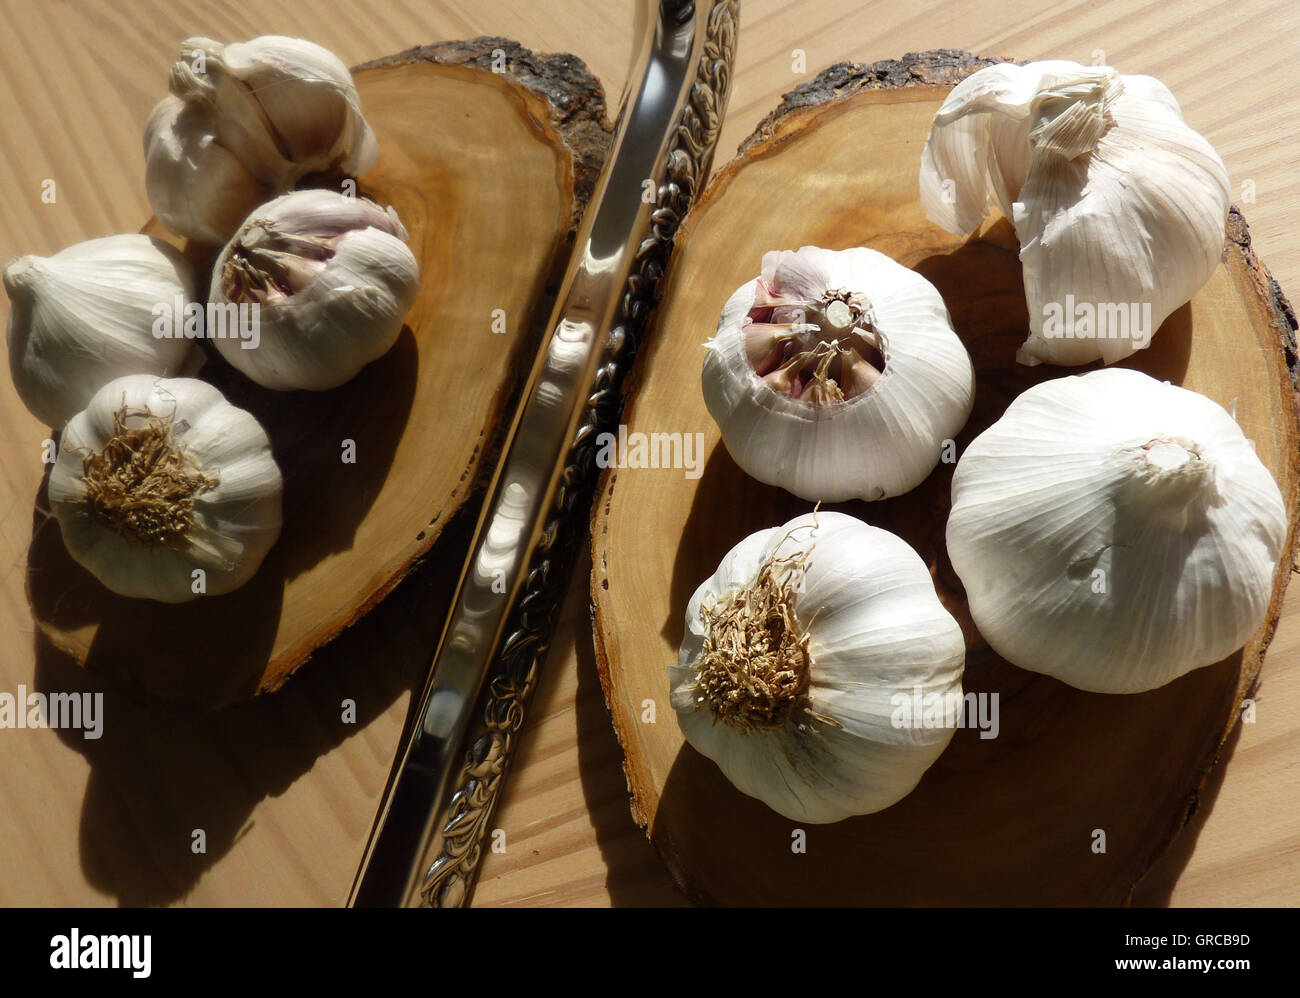 Garlic In Front Of A Mirror, Looks Like A Butterfly Stock Photo